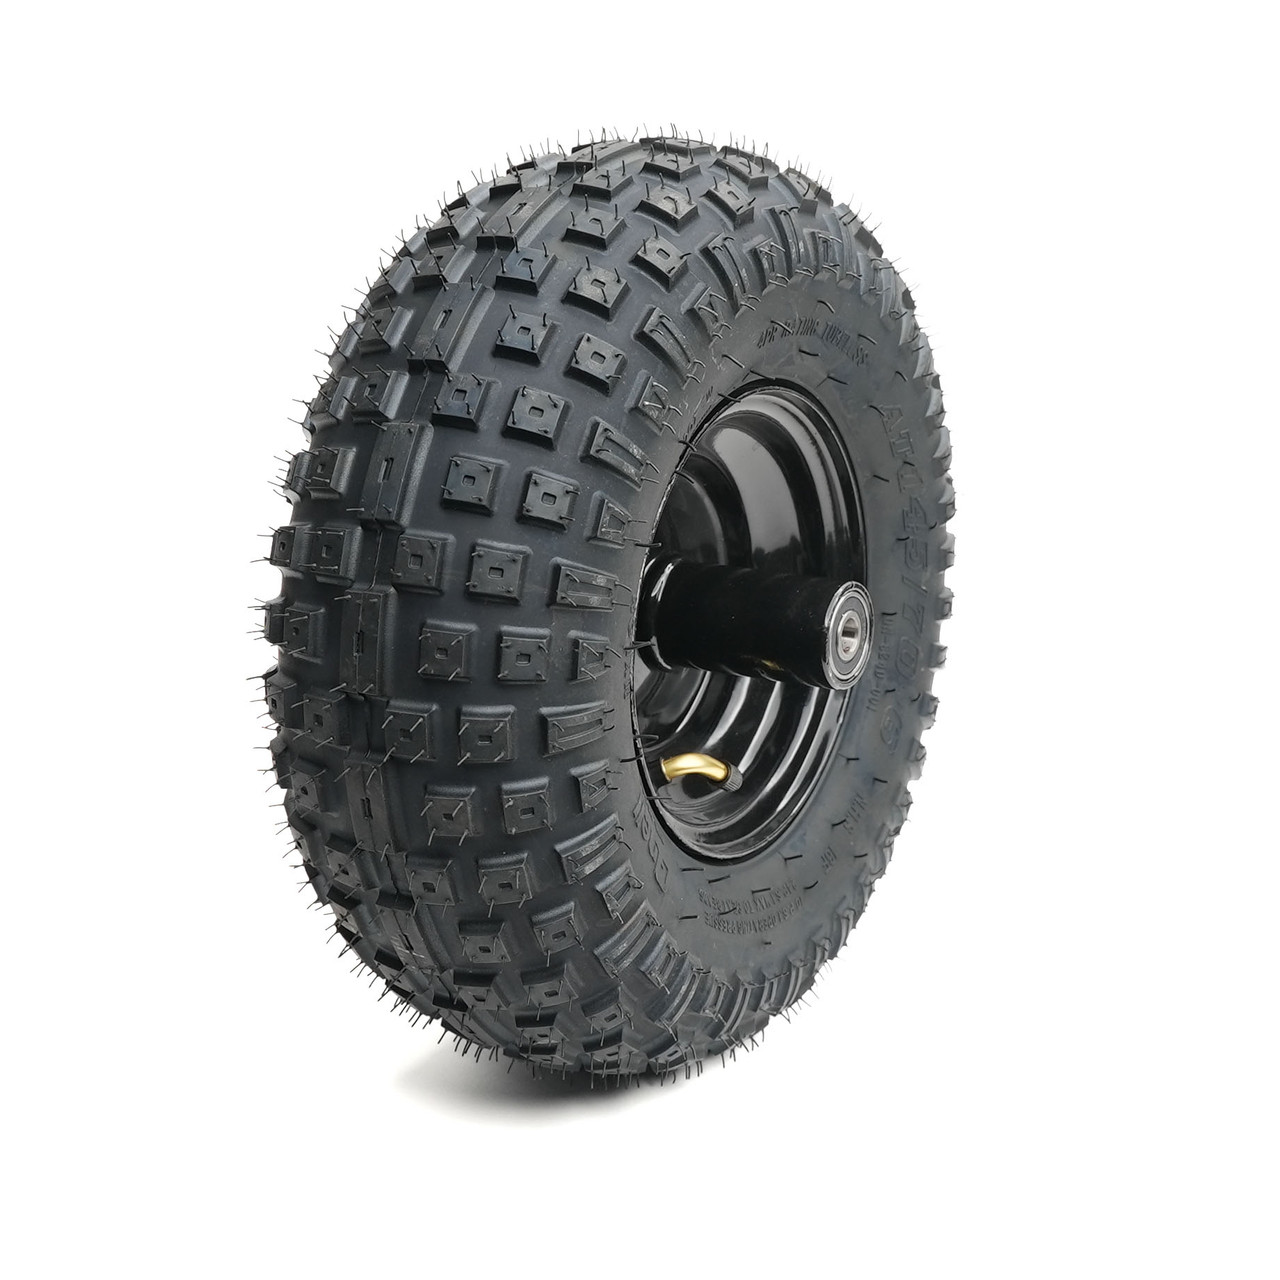 Front Wheel Assembly, Storm 200 (44100-XL) Tread view of TrailMaster Storm 200 Off-Road Replacement Front Wheel